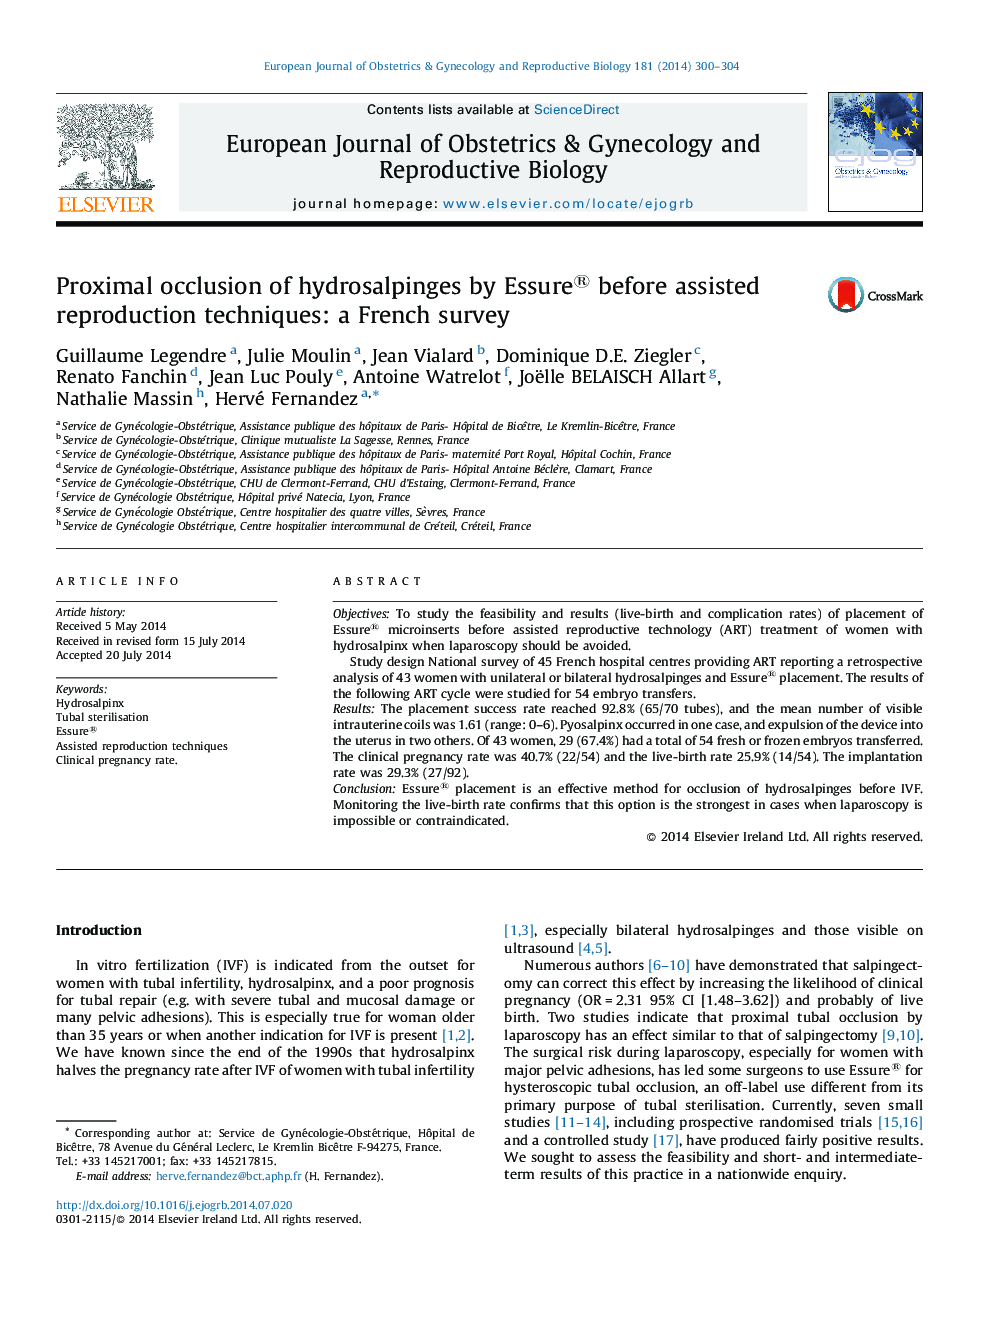 Proximal occlusion of hydrosalpinges by Essure® before assisted reproduction techniques: a French survey